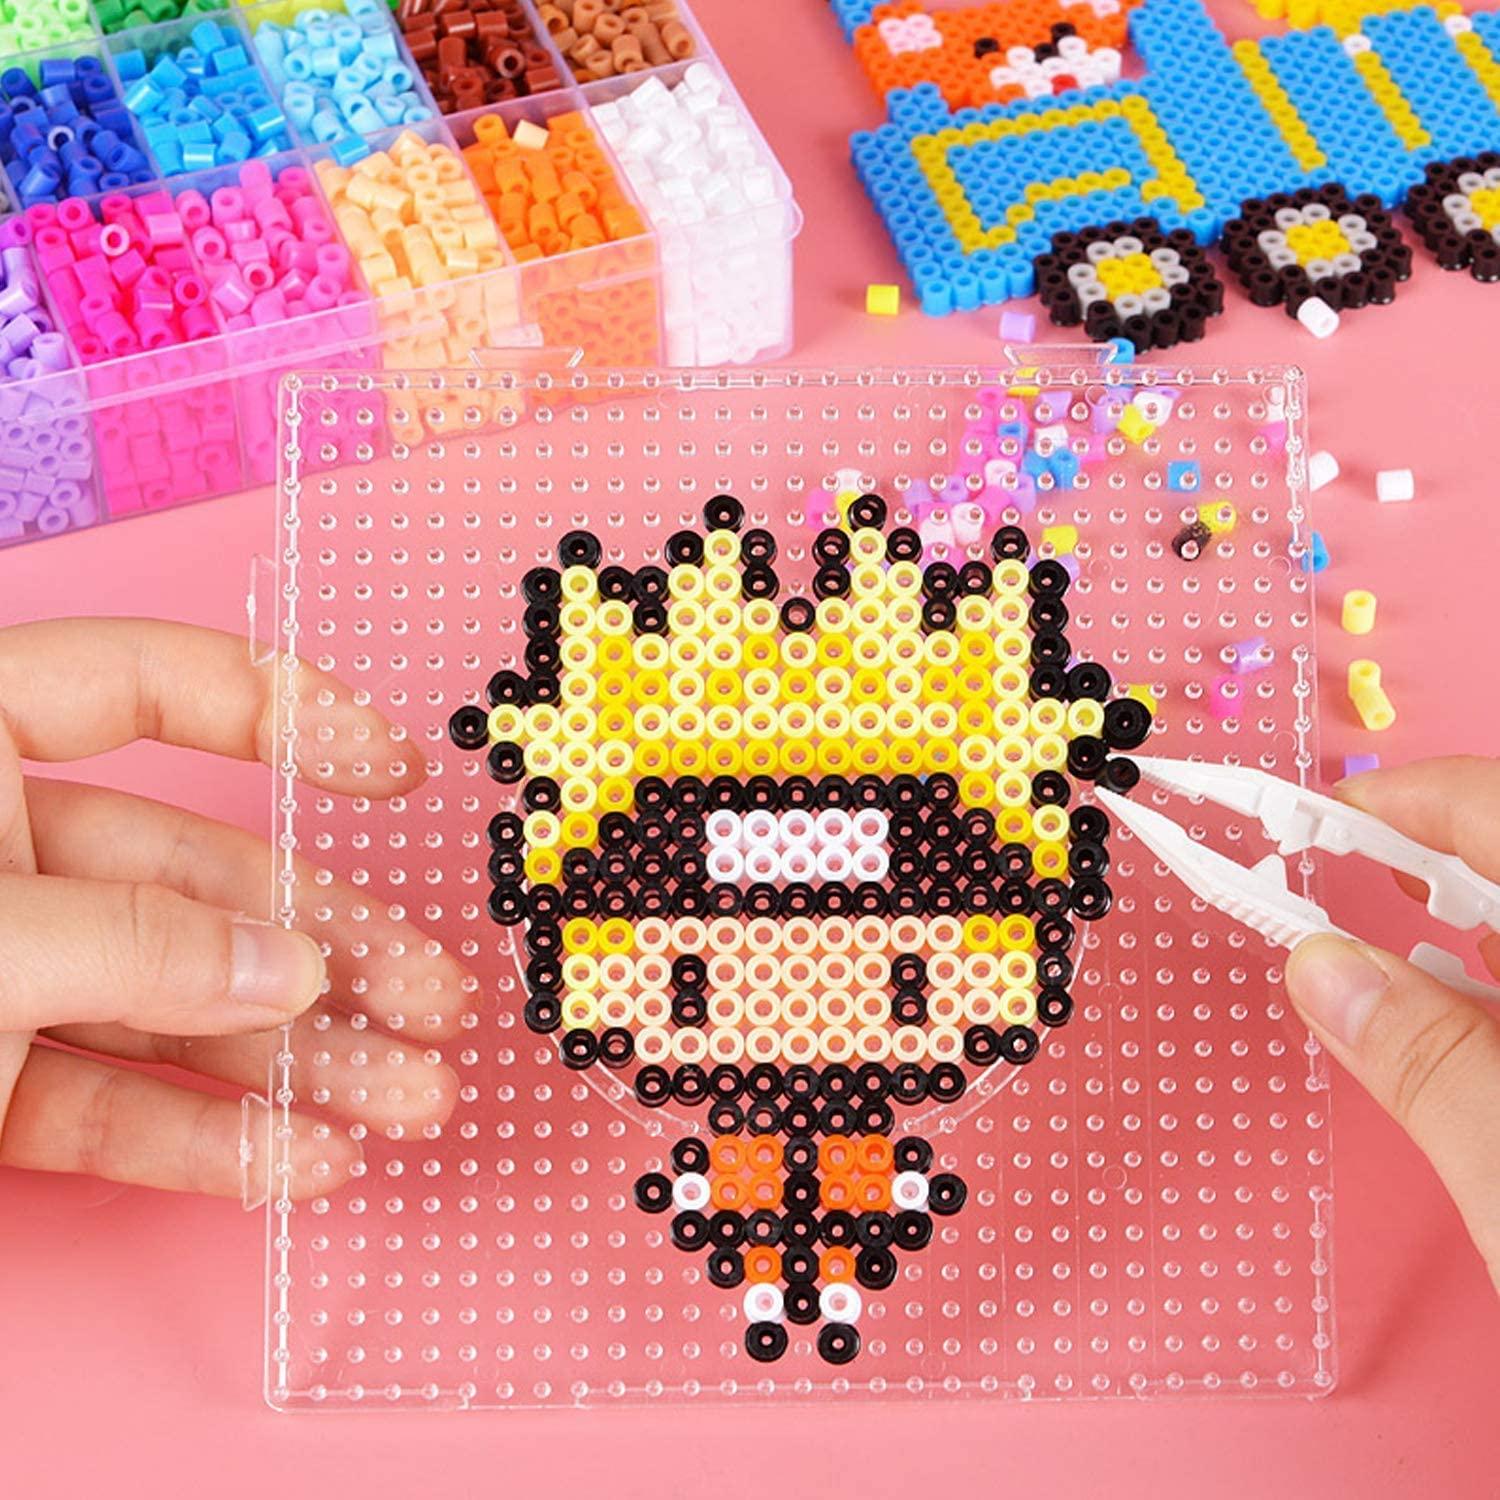 New Craft Fuse Beads Square Puzzle Pegboards Patterns For 5 Mm Hama Beads  Perler Beads Diy Puzzles For Kids Children - Puzzles - AliExpress